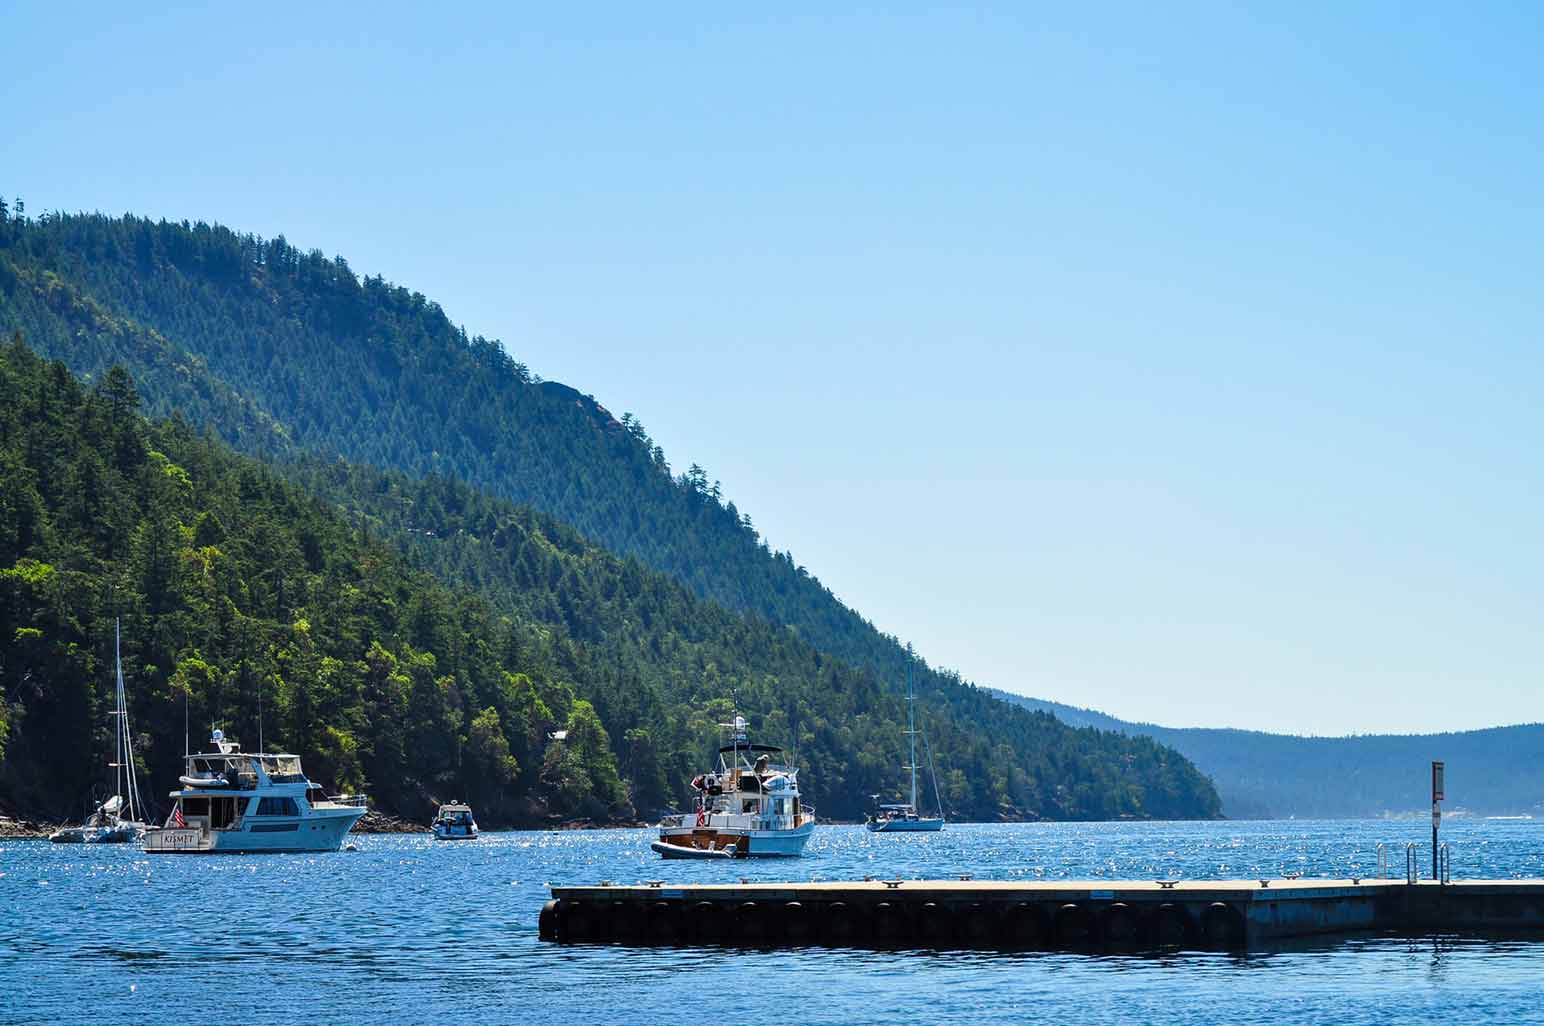 If you are ready to retreat to paradise, then read on for our 5 tips for visiting Orcas Island.